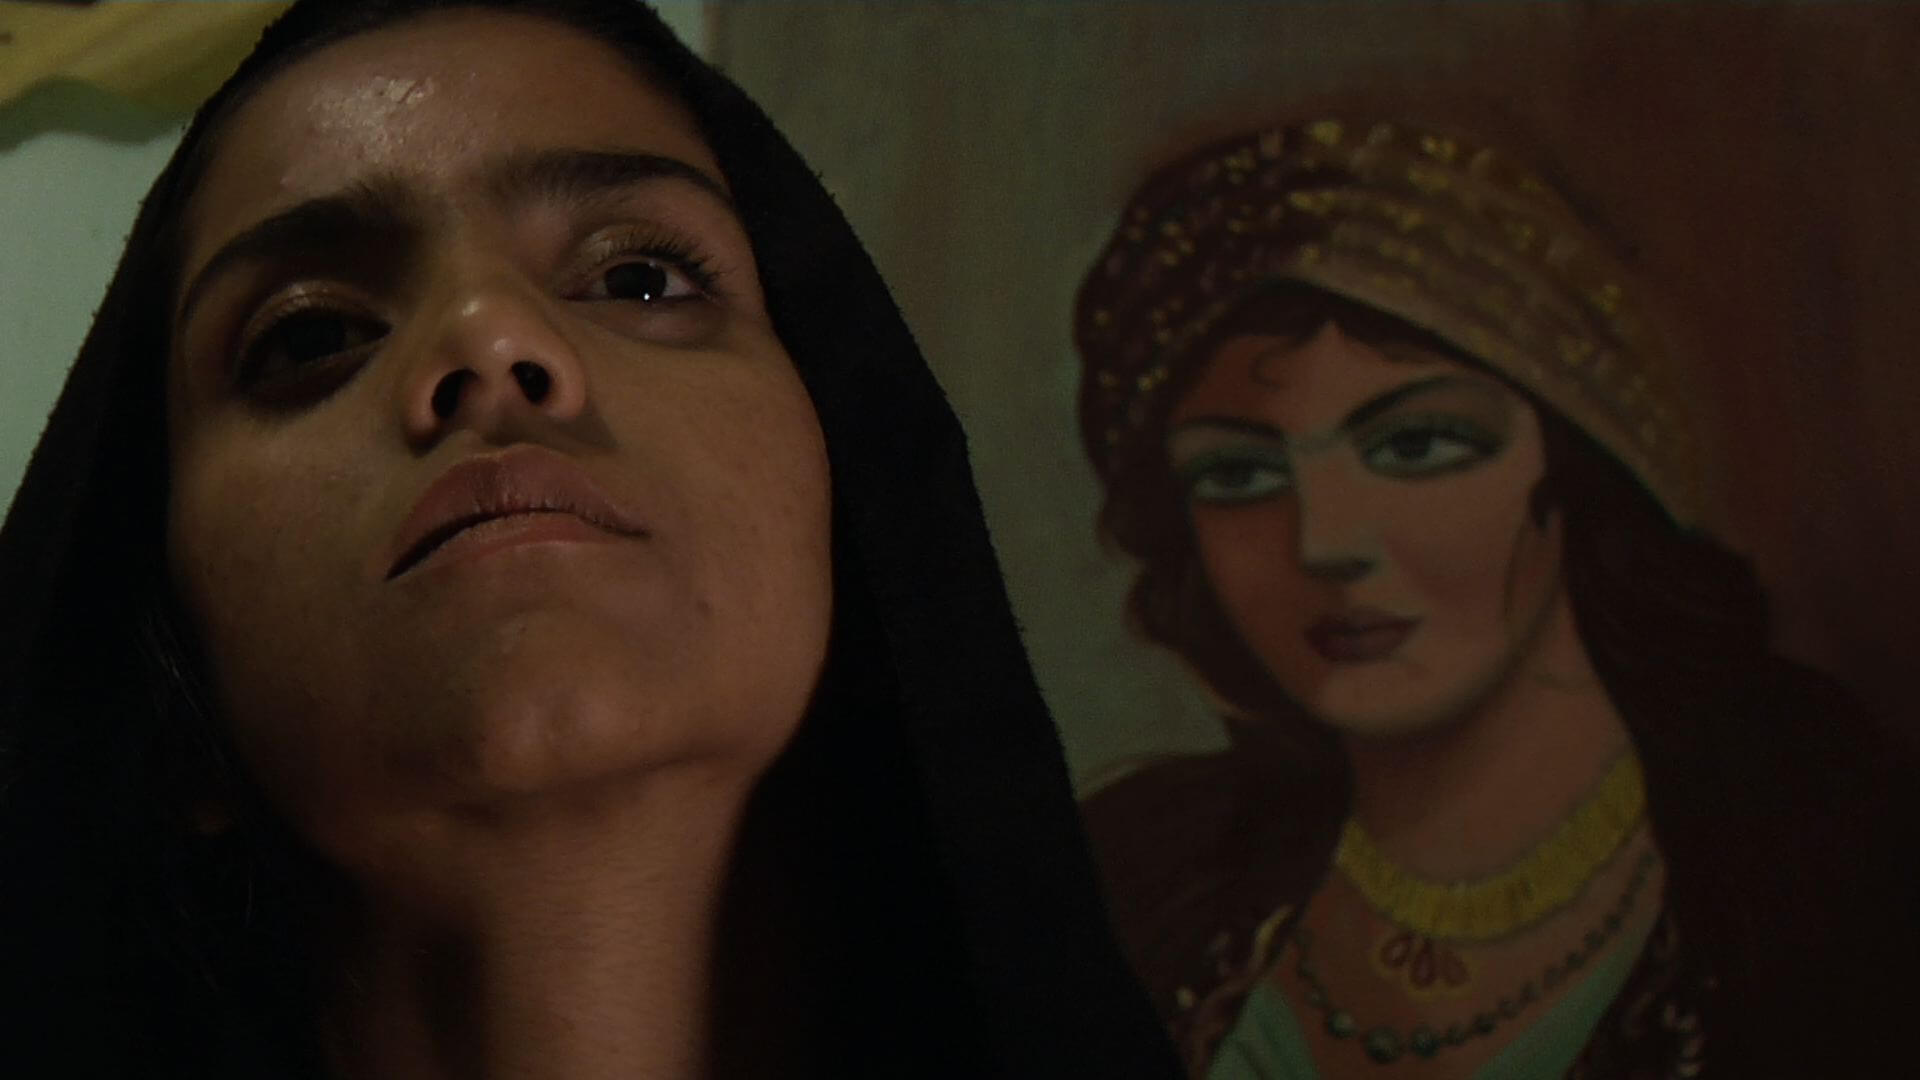 Still from Sonita. Sonita in front of the camera tilts her chin up, behind her there is a mural of a woman.